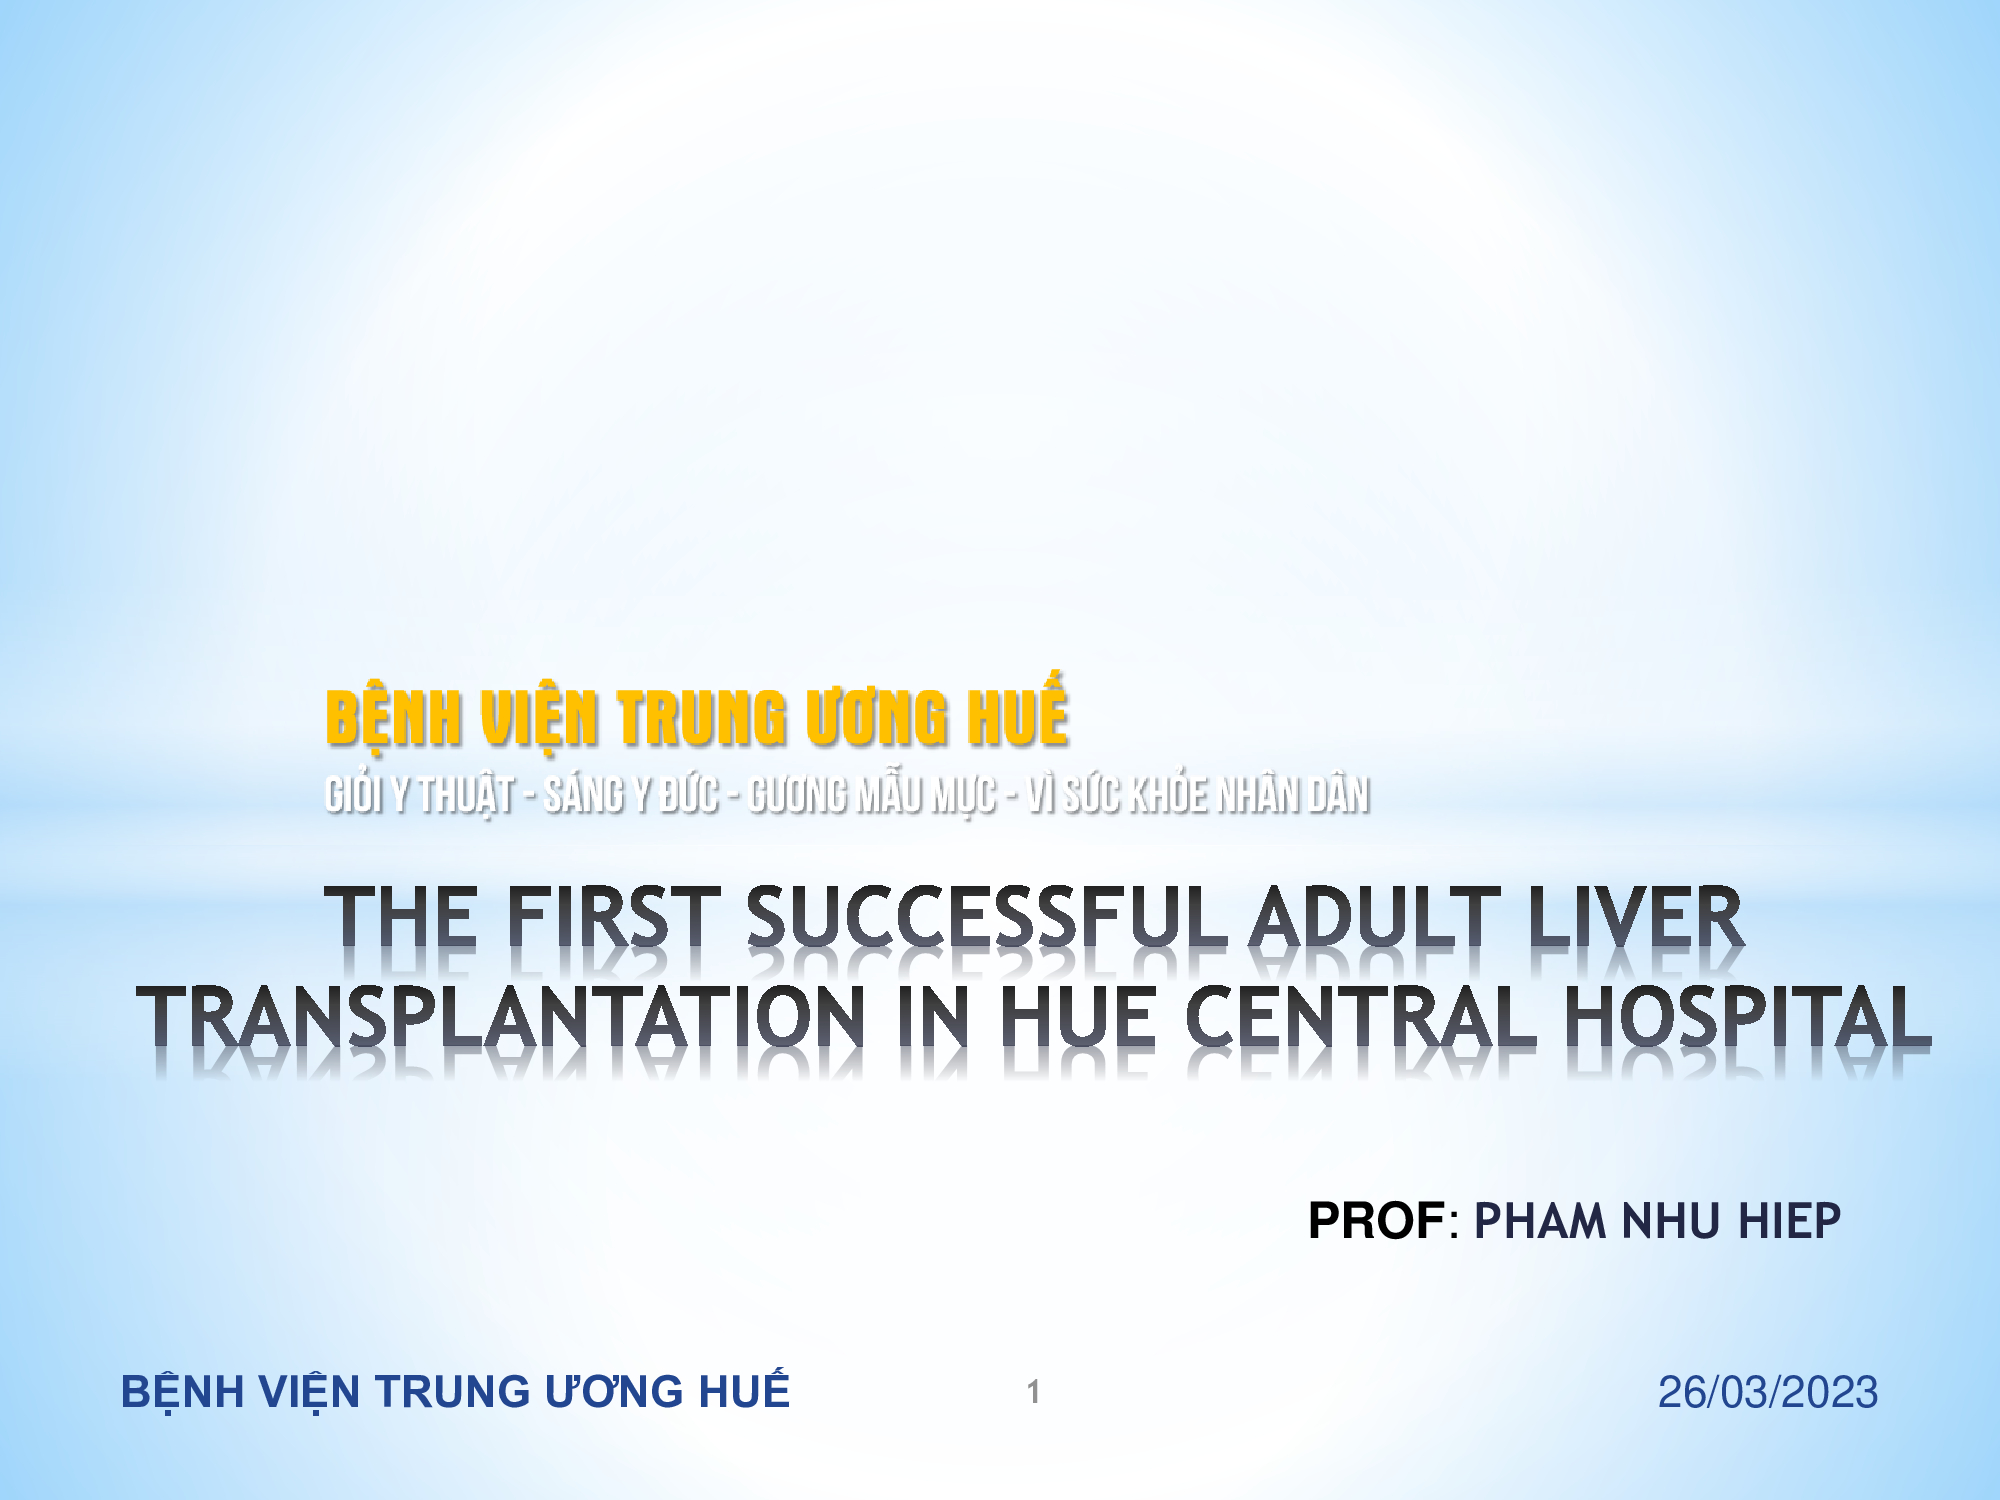 The first successful adult liver transplantation in the Hue central hospital